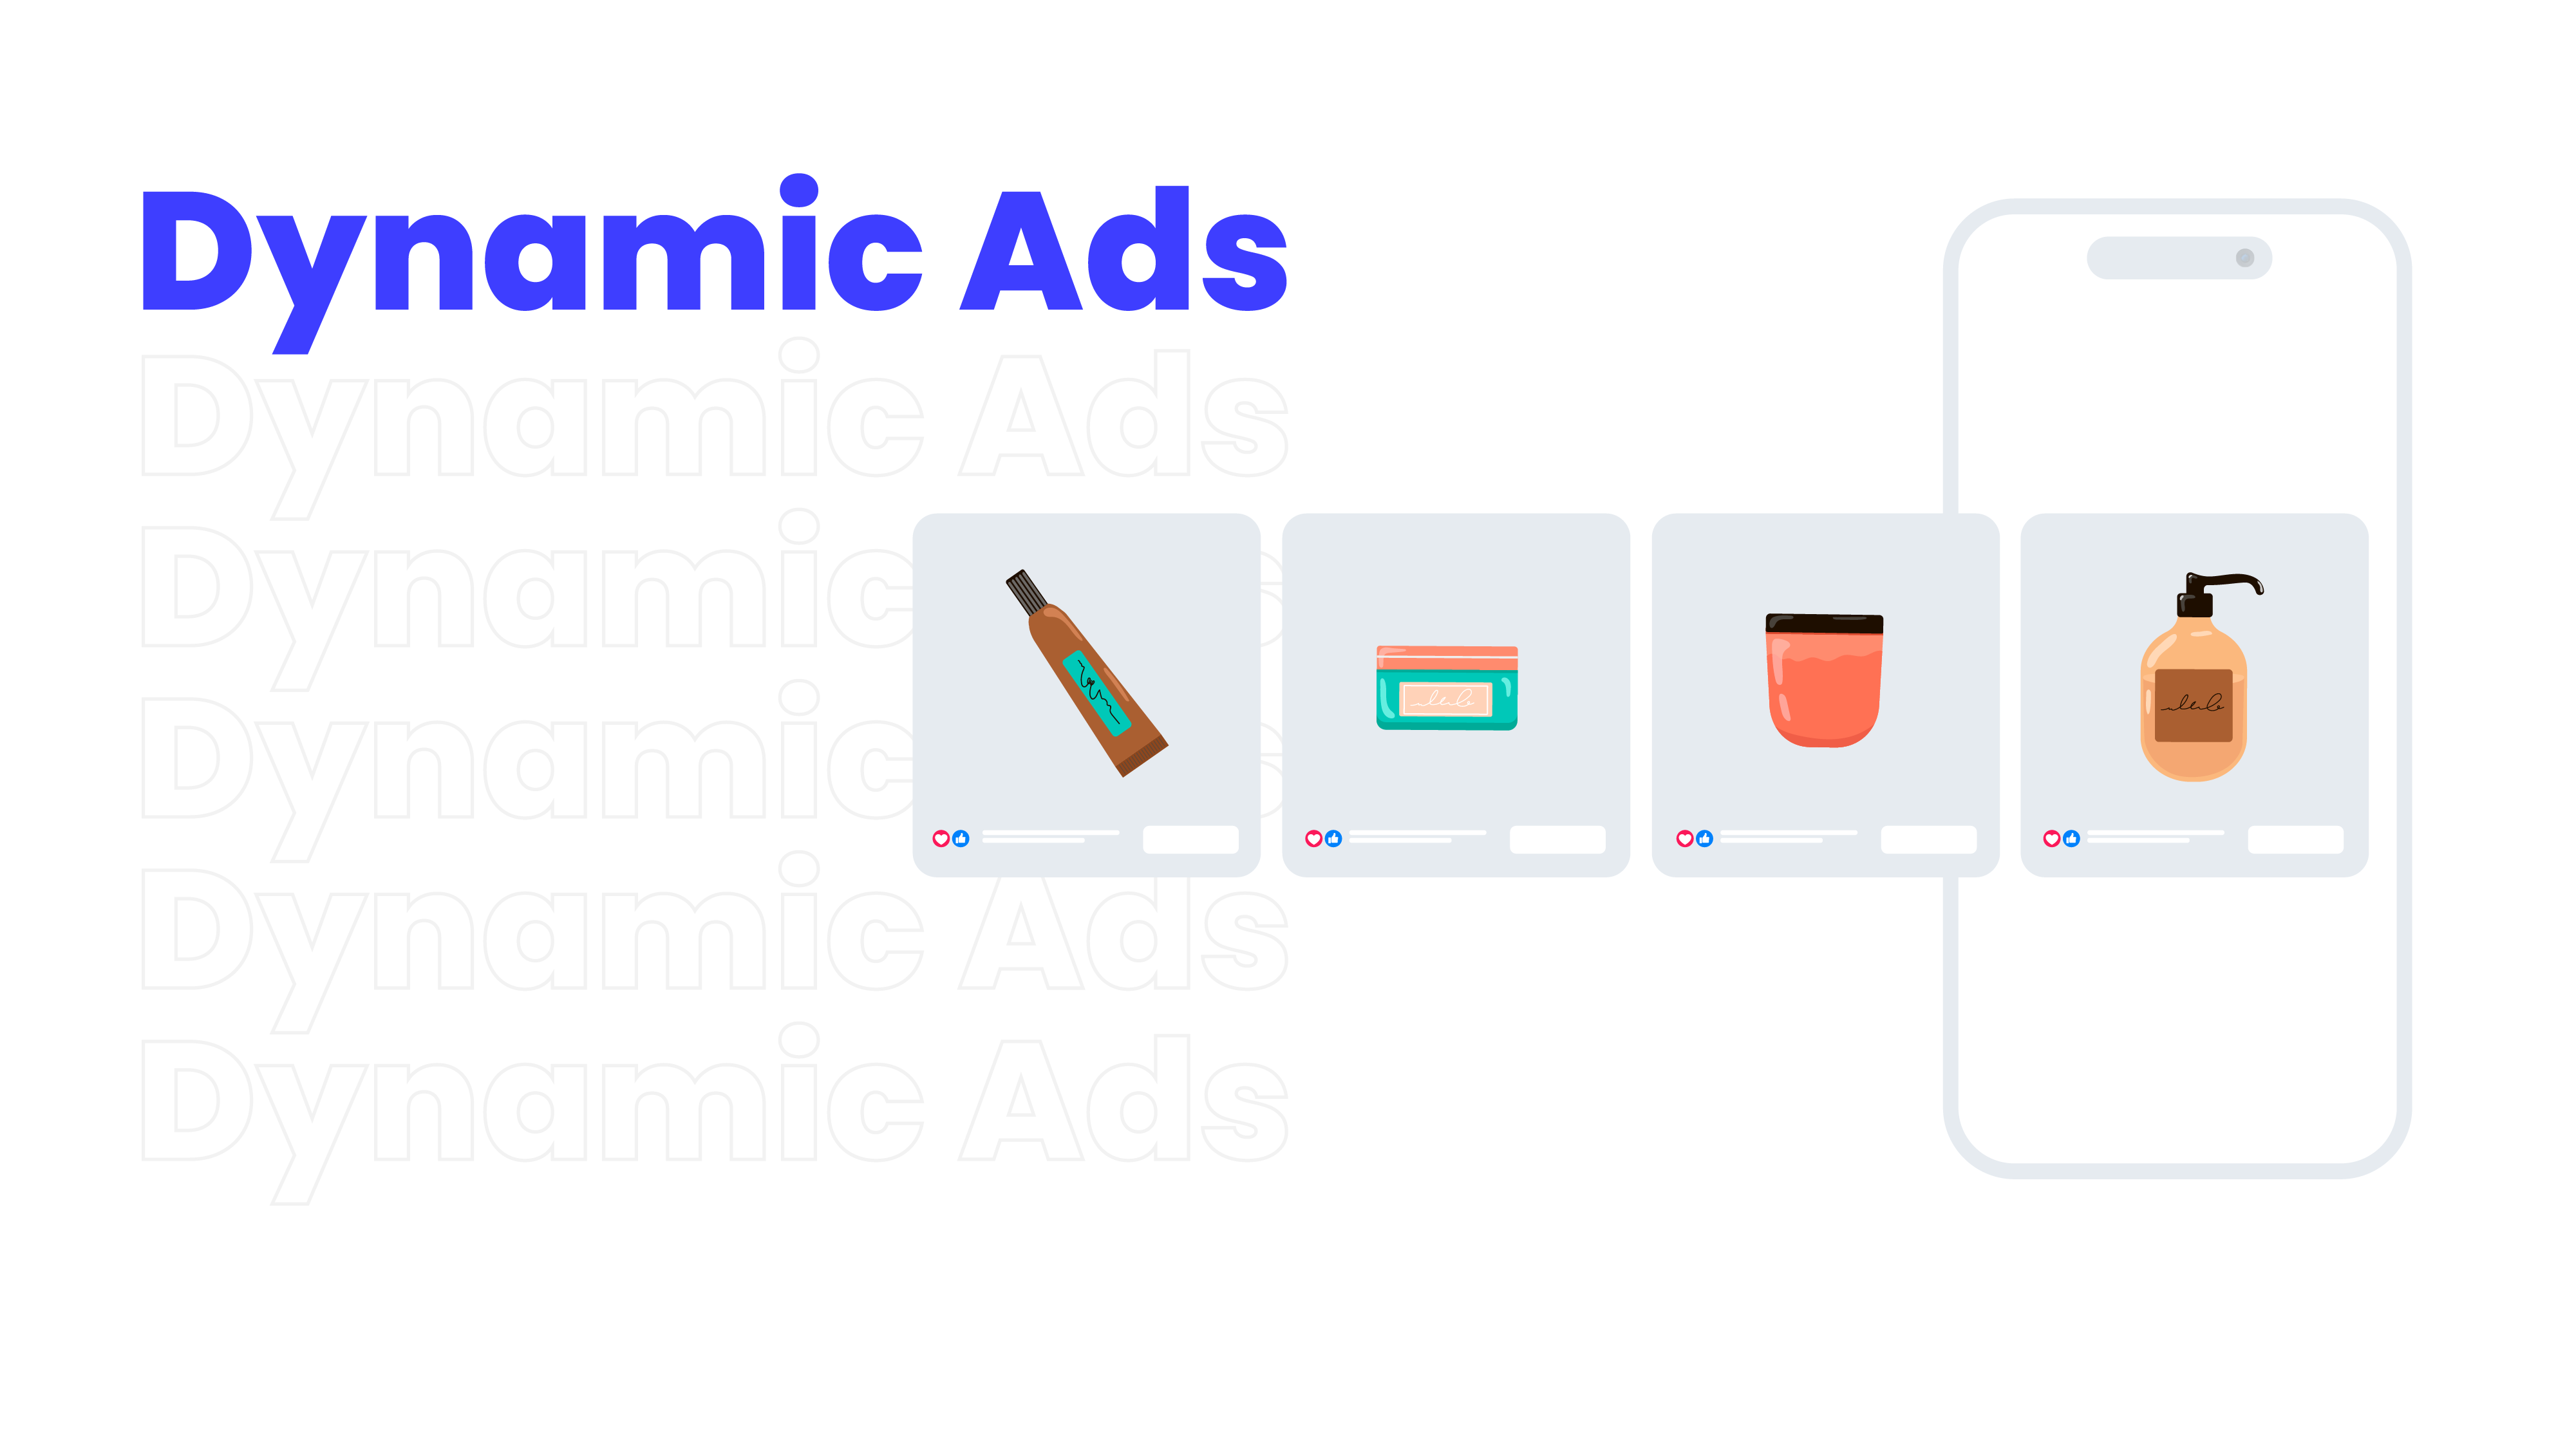 What Are Dynamic Ads?